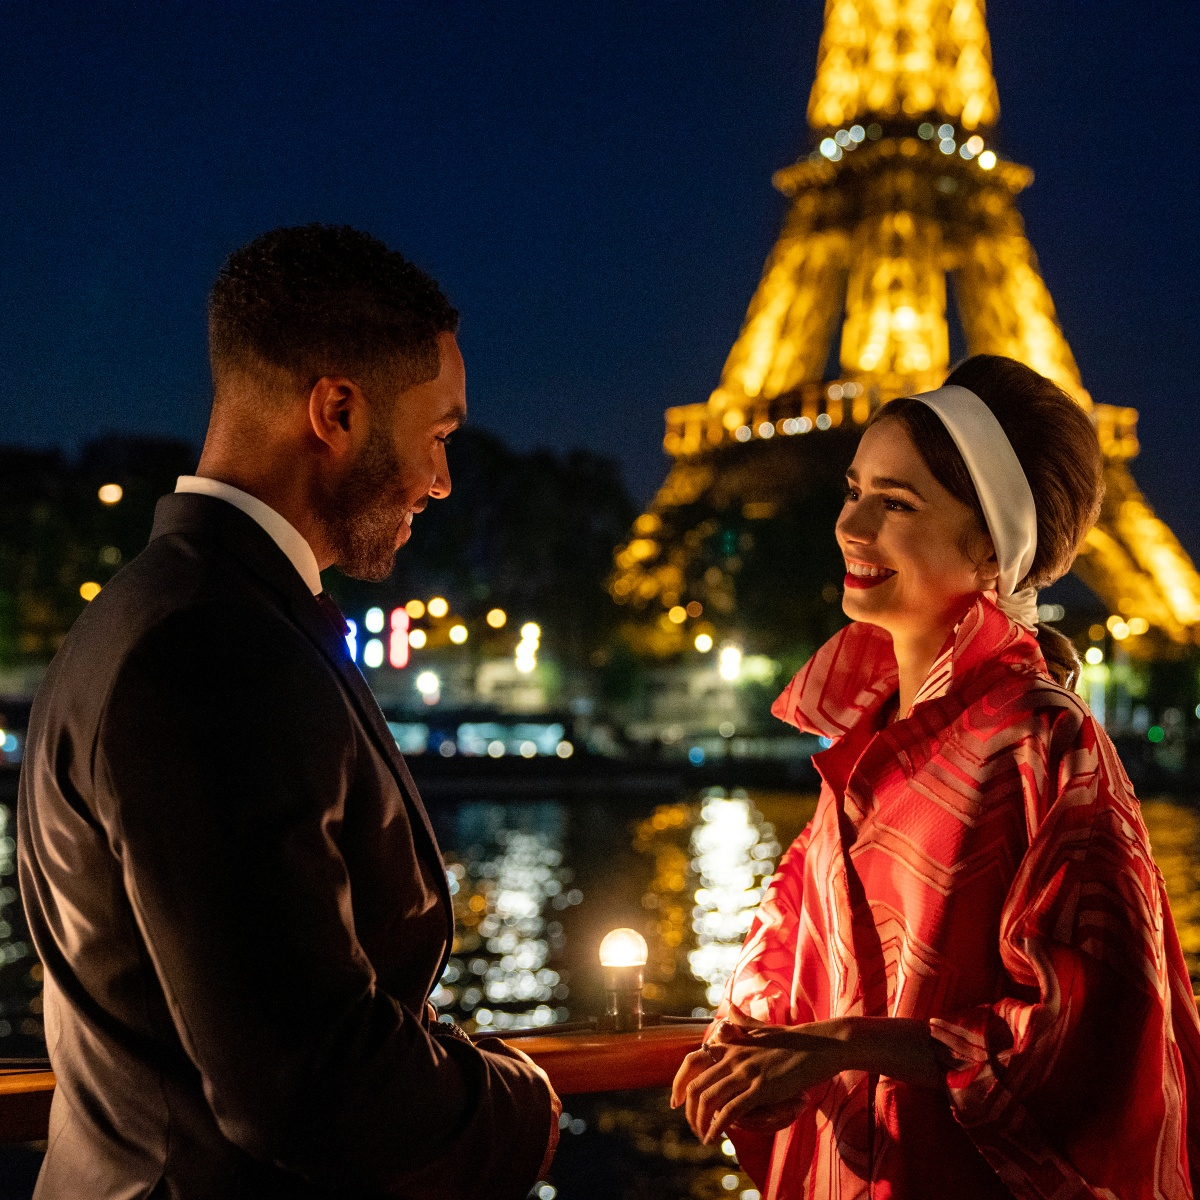 One Show Two Takes: Emily in Paris Season 3 - The Mail & Guardian